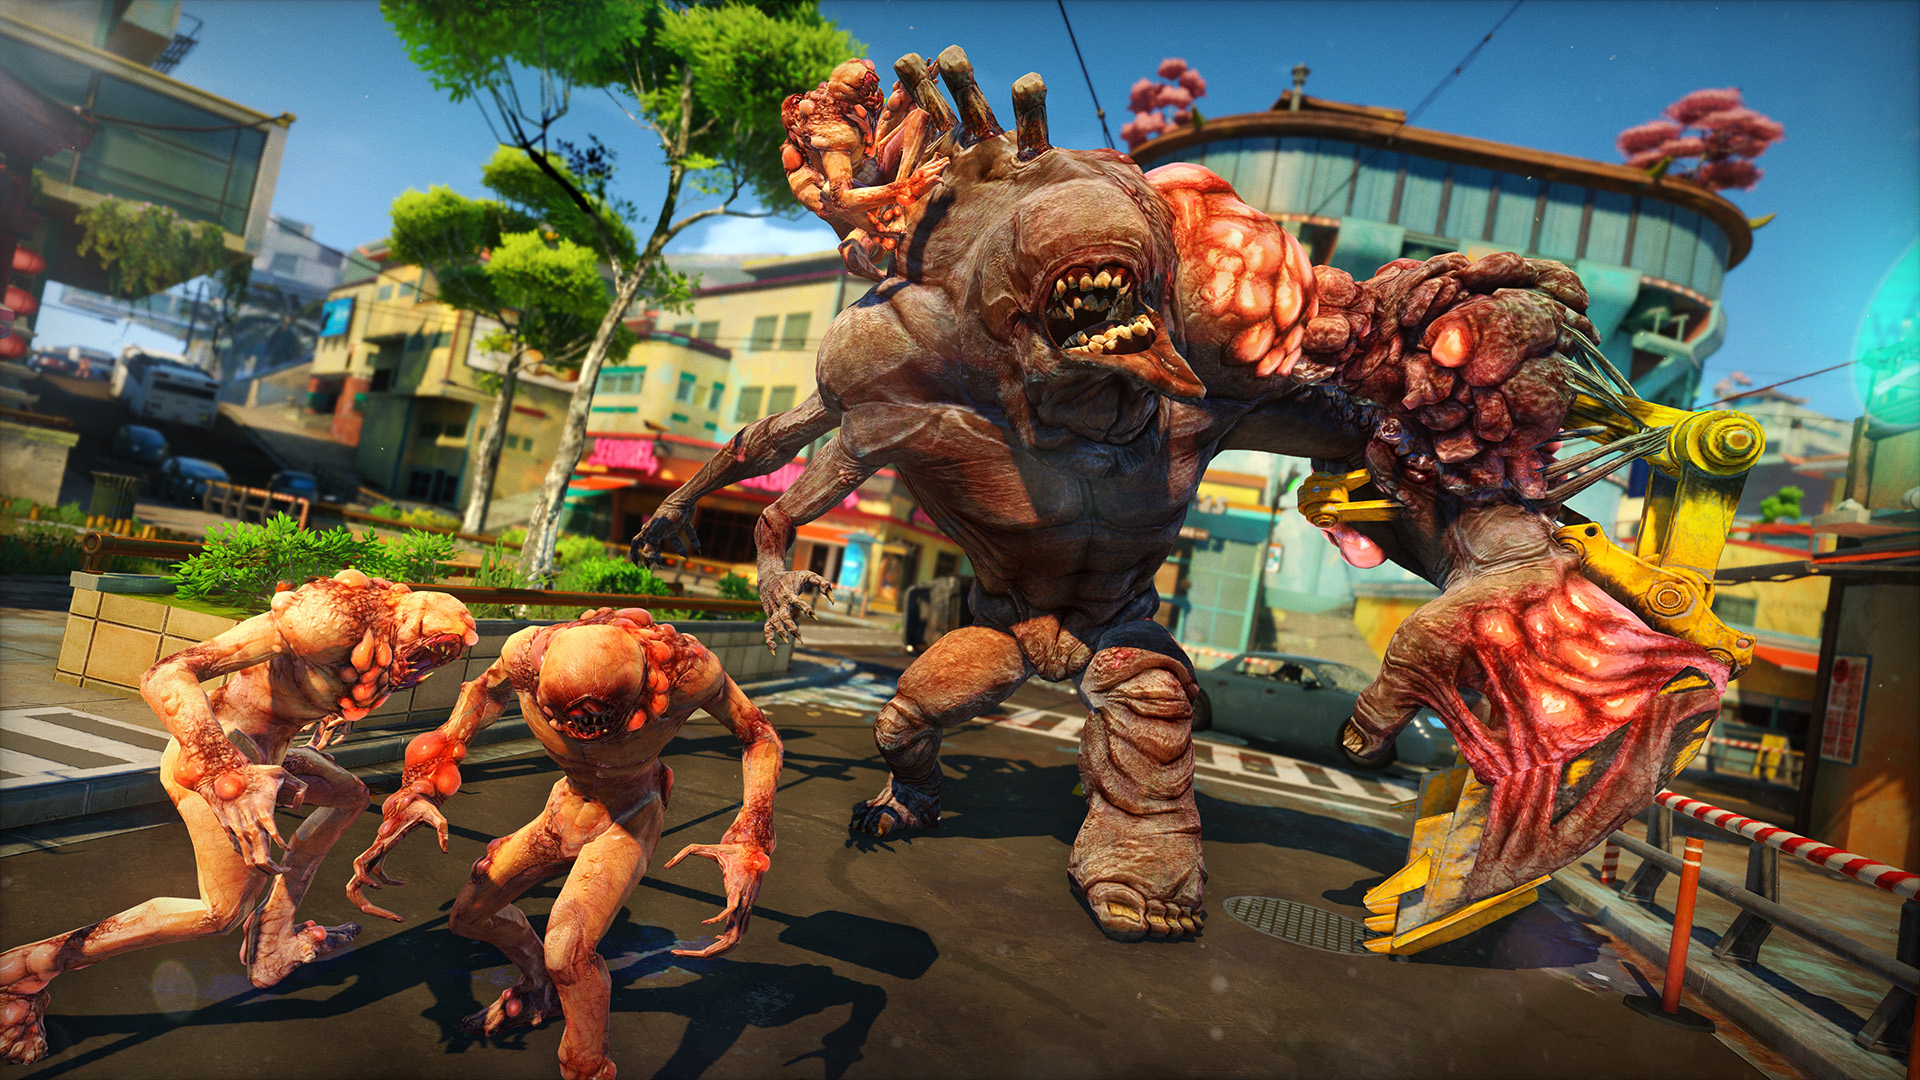 Insomniac Explains Sunset Overdrive's Xbox One Exclusivity - Game Informer